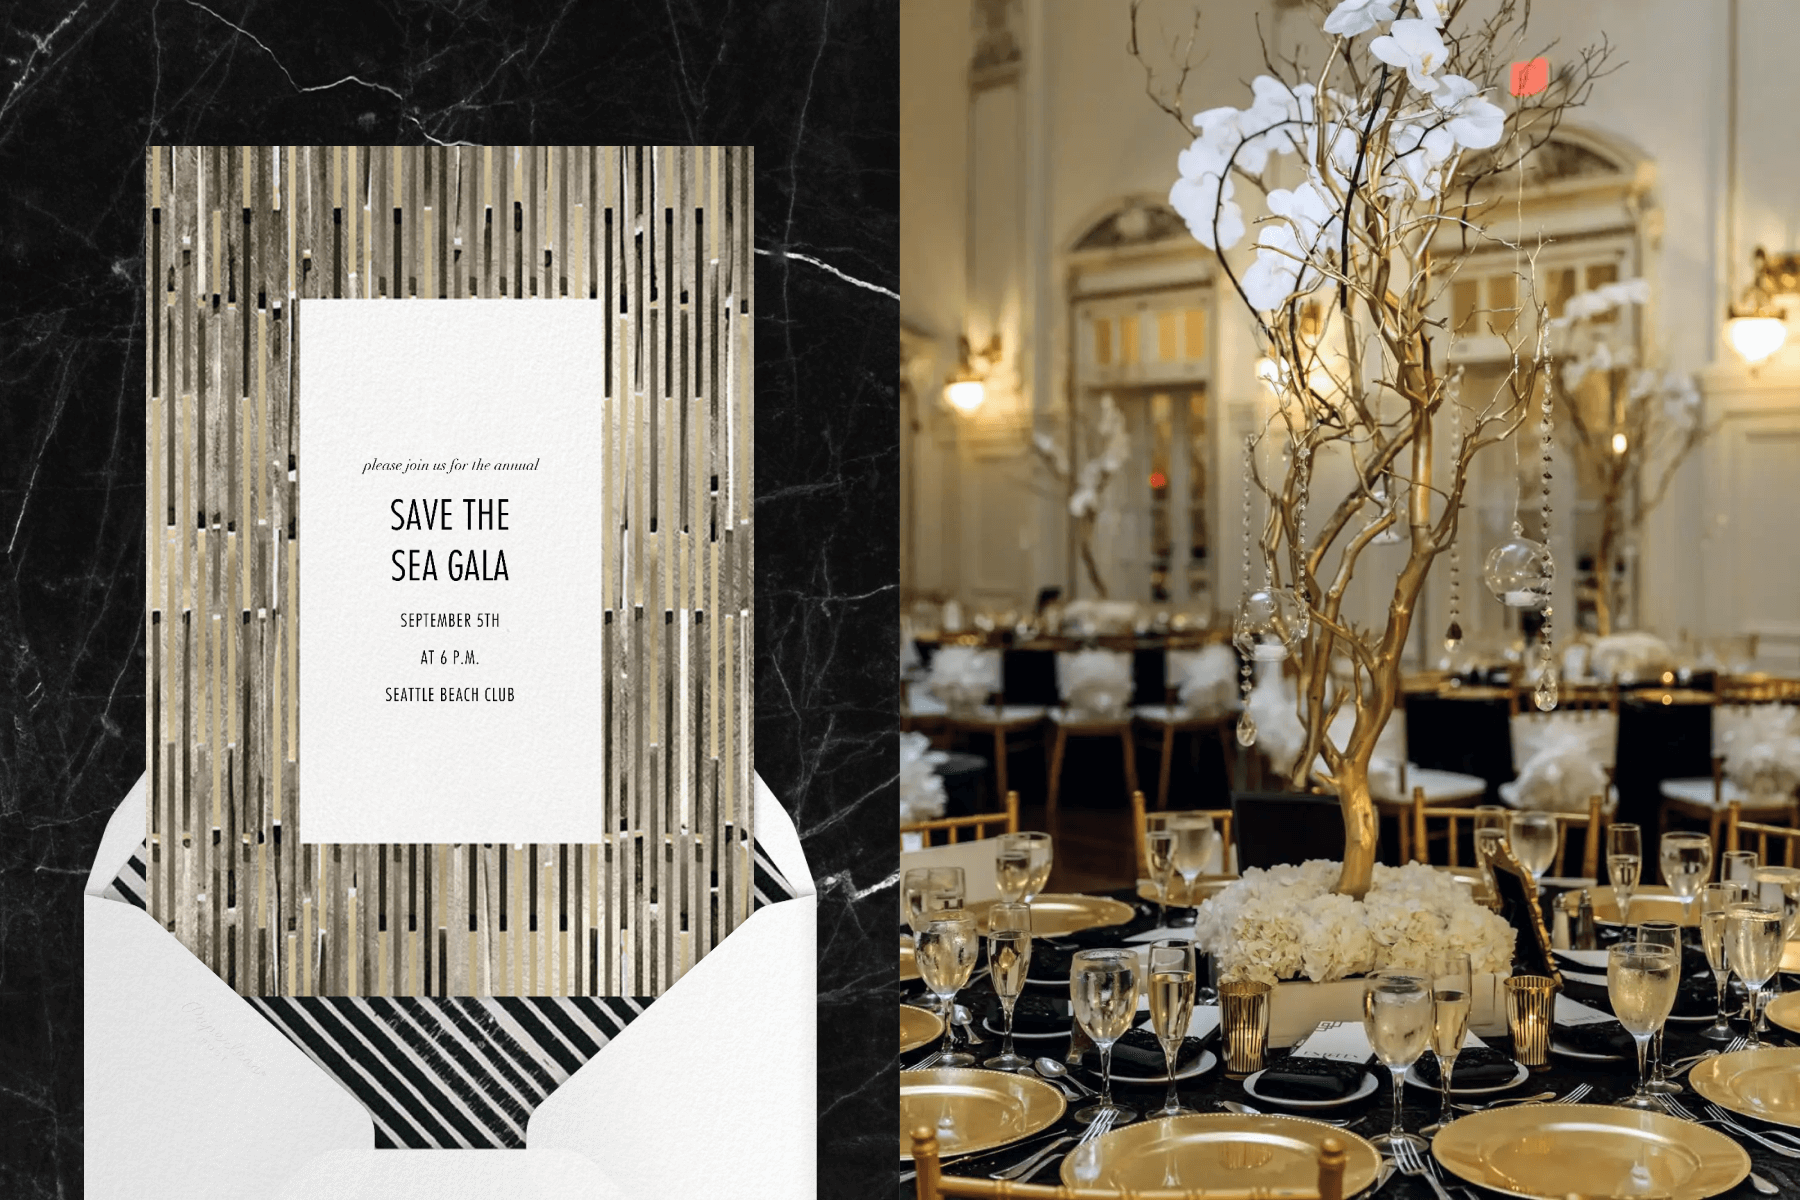 Left: An invitation reads “save the sea” gala on top of a black, gold, and white abstract, striped vertical background with matching envelope. Right: A decorated table is set with gold plates, wine and champagne glasses and golden votives. A golden tree centerpiece is surrounded by white flowers in the center of the round table.